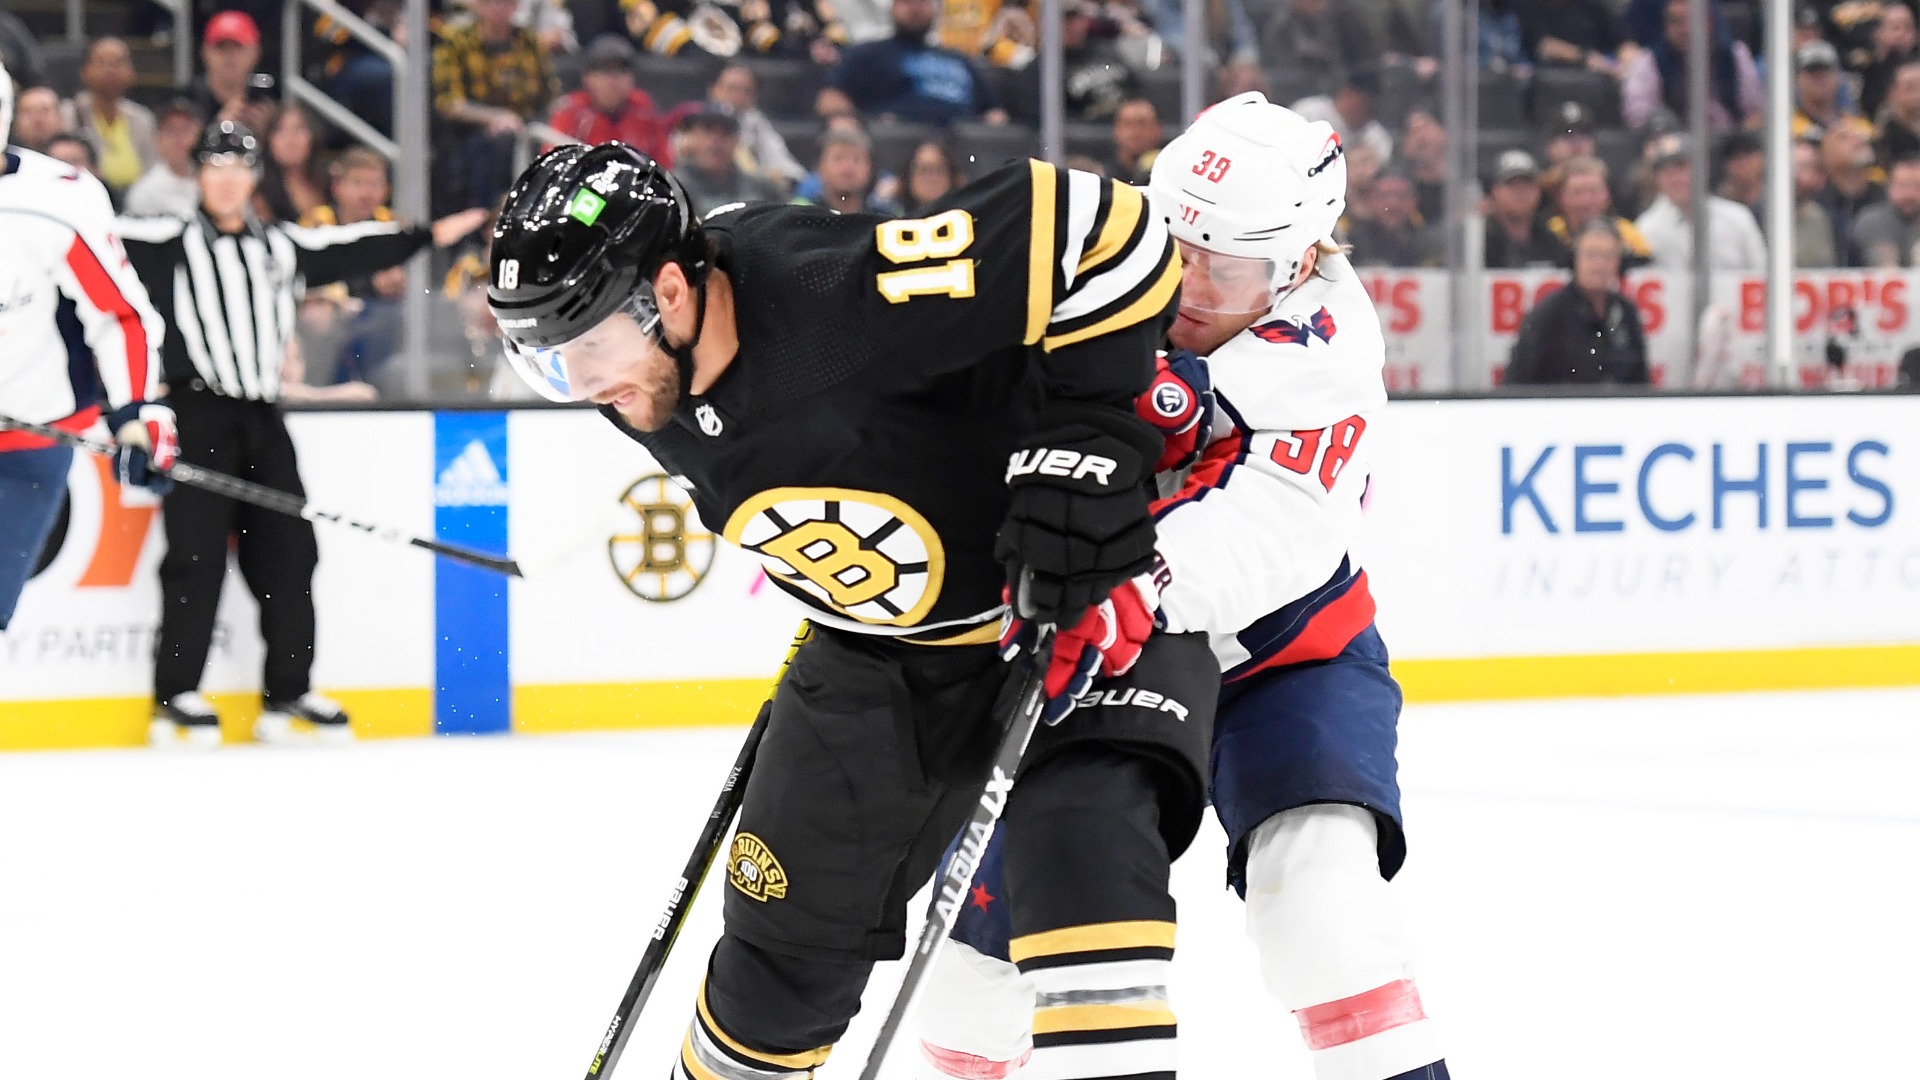 A magical night at Garden as Bruins' Charlie Coyle scores one for